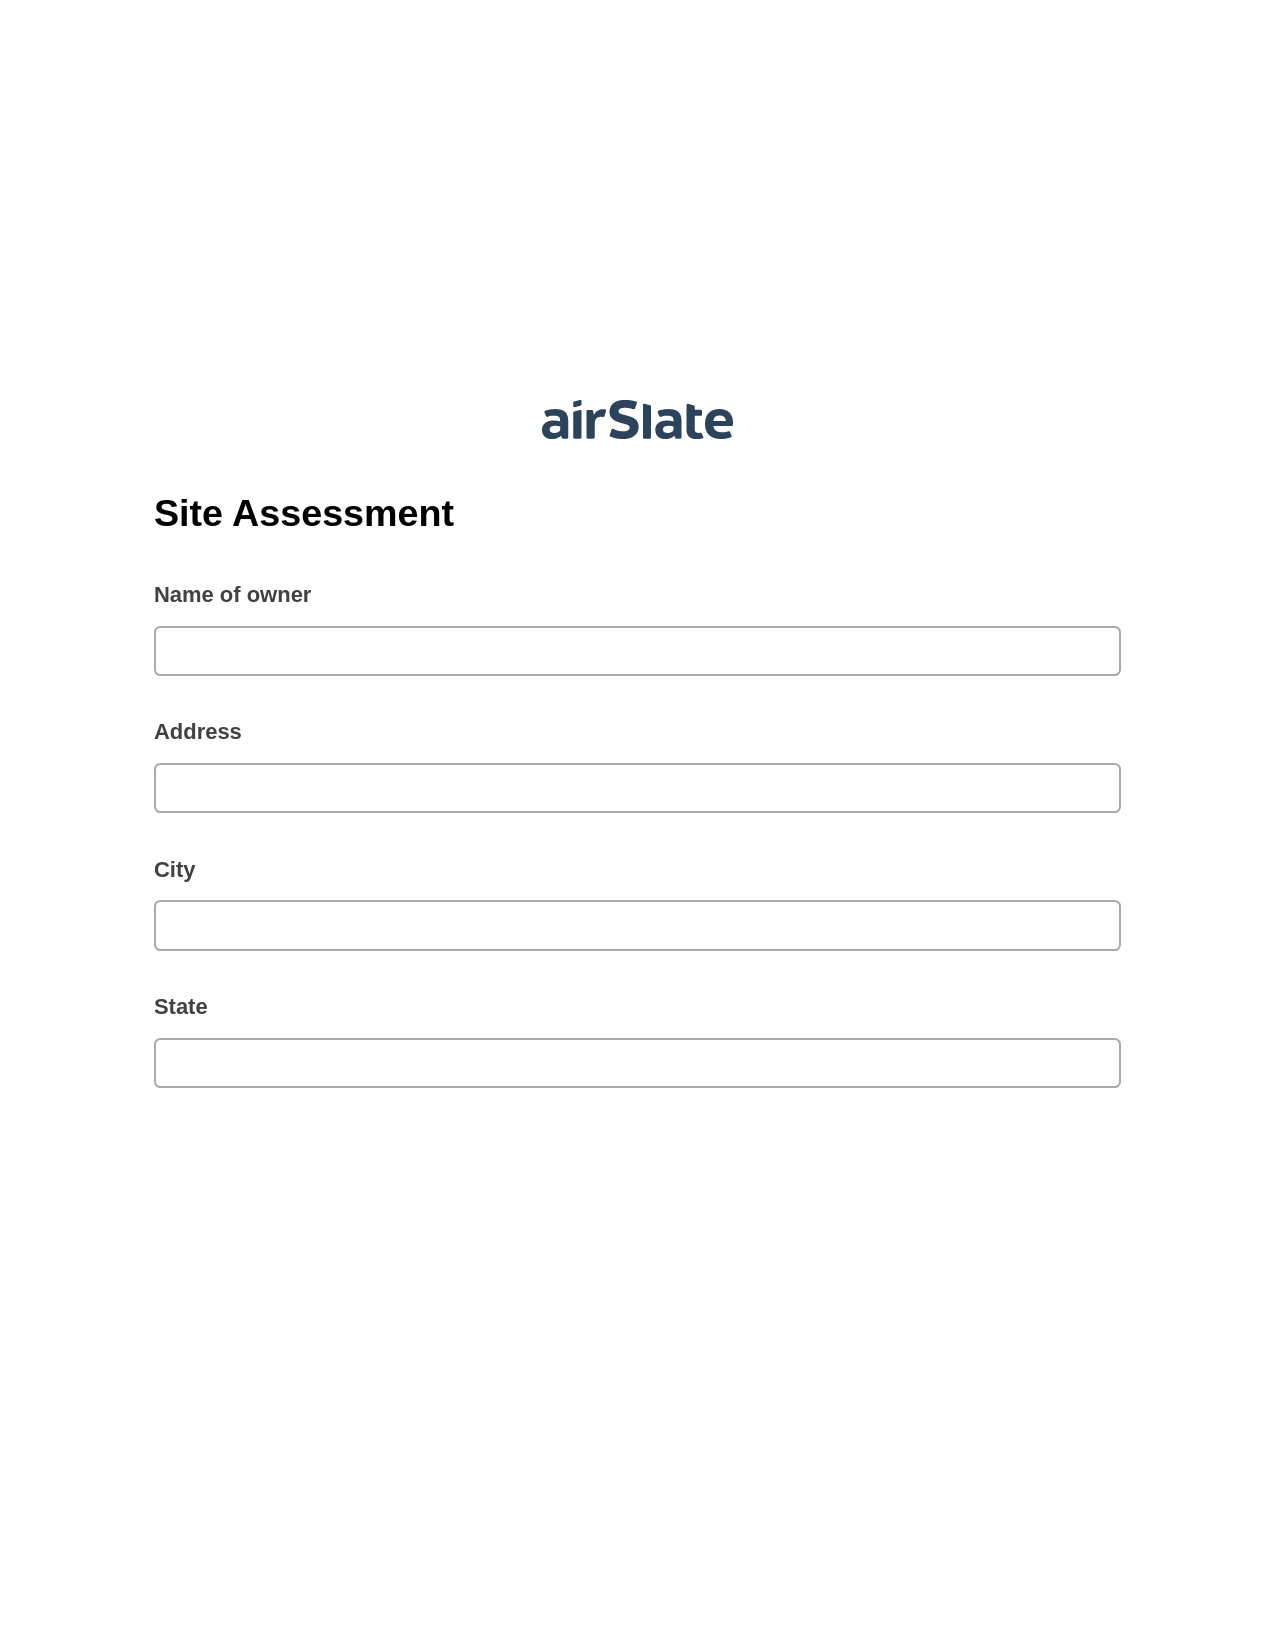 Site Assessment Pre-fill Slate from MS Dynamics 365 Records Bot, Audit Trail Bot, Export to Salesforce Bot